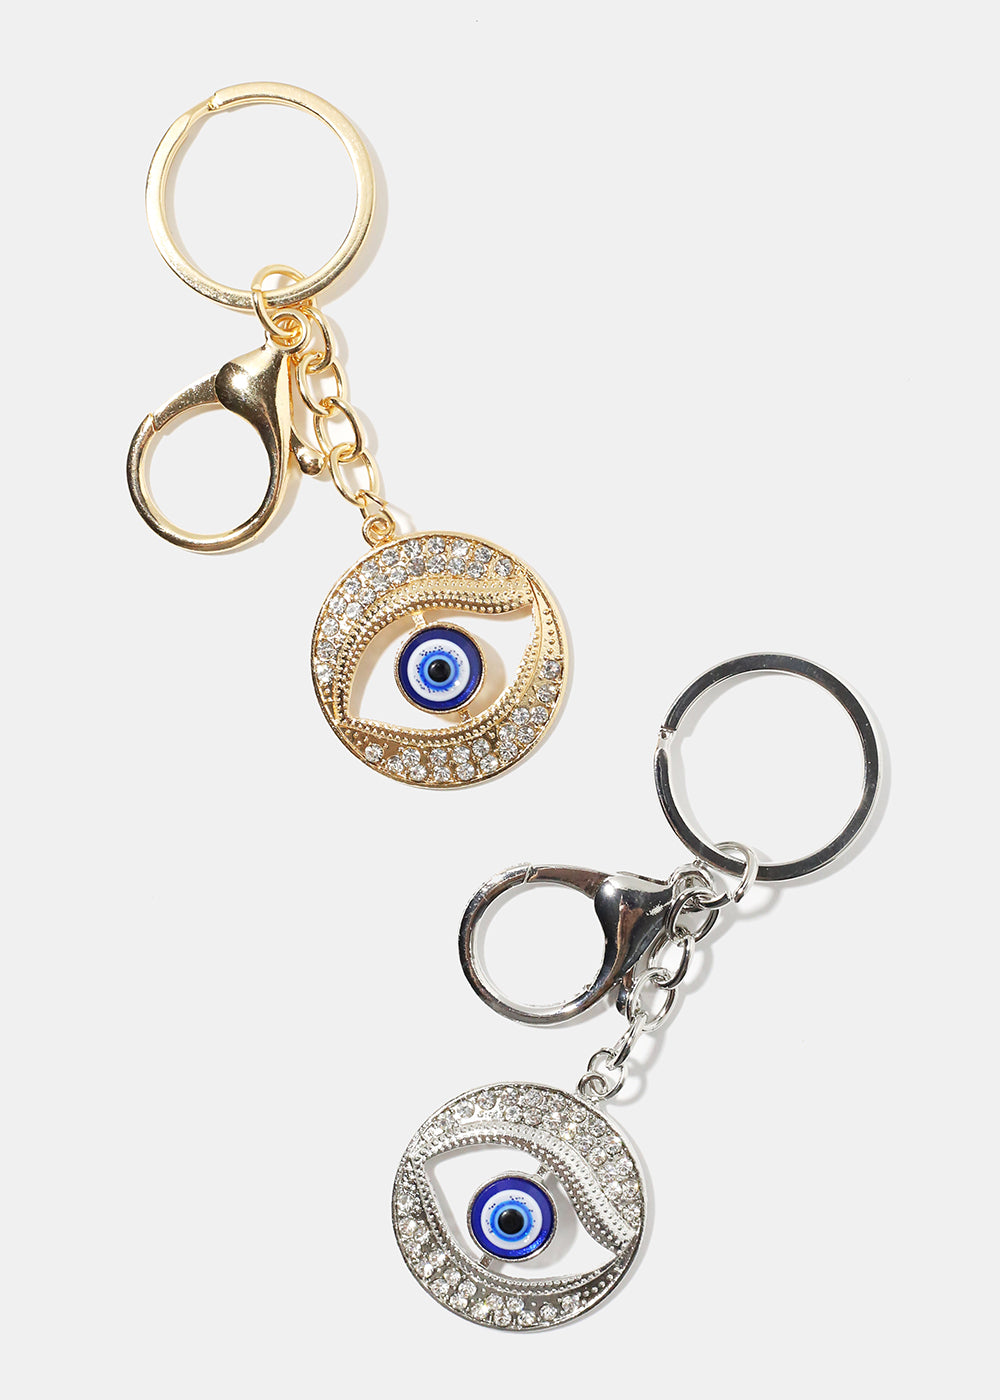 Protective gold or silver evil eye keychains, located in Owego, NY